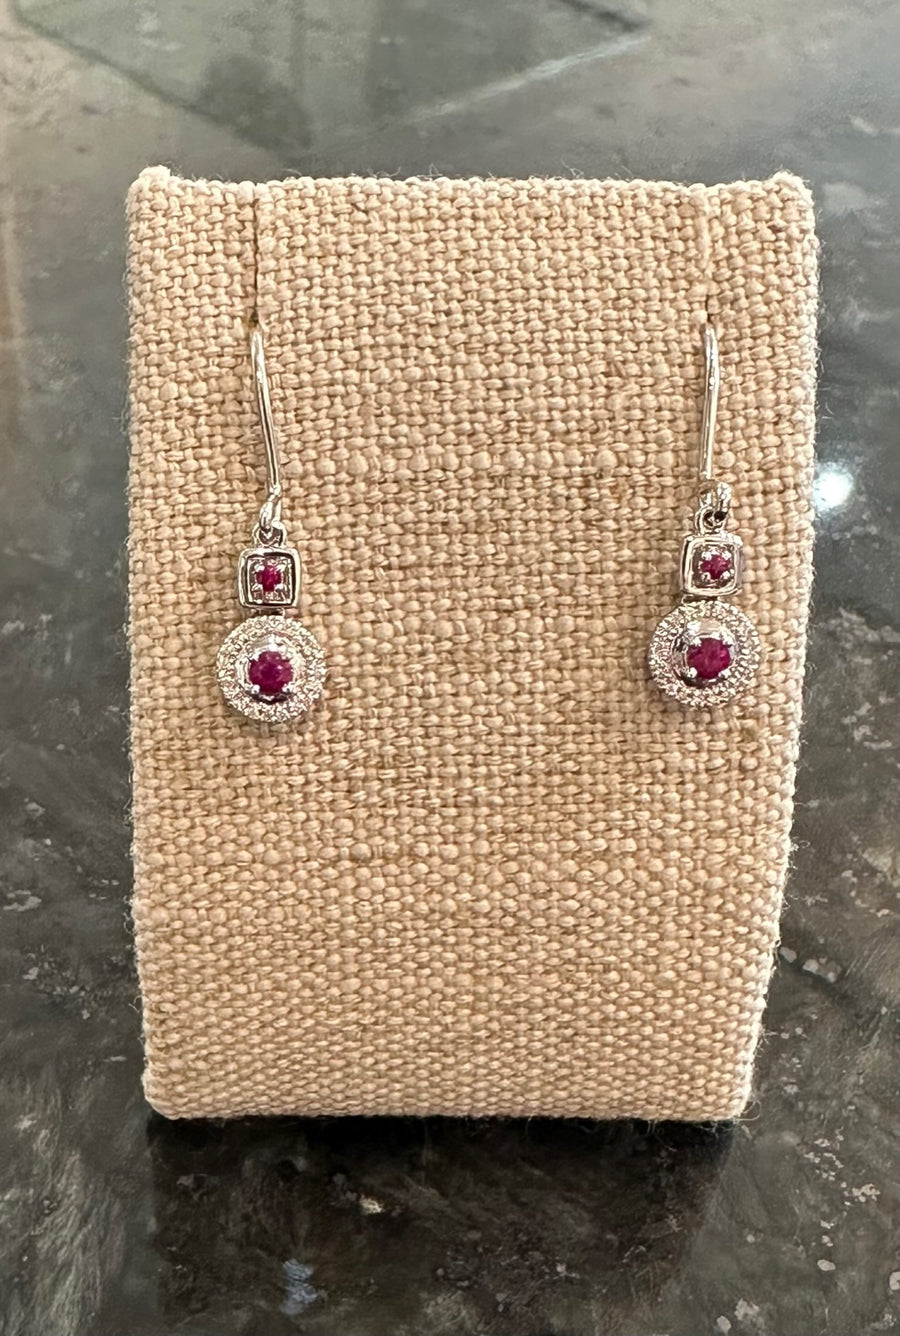 Ruby & Diamond "Anytime" Drop Earrings in 14K White Gold, 38D=.06CTTW, 4R=.16CTTW